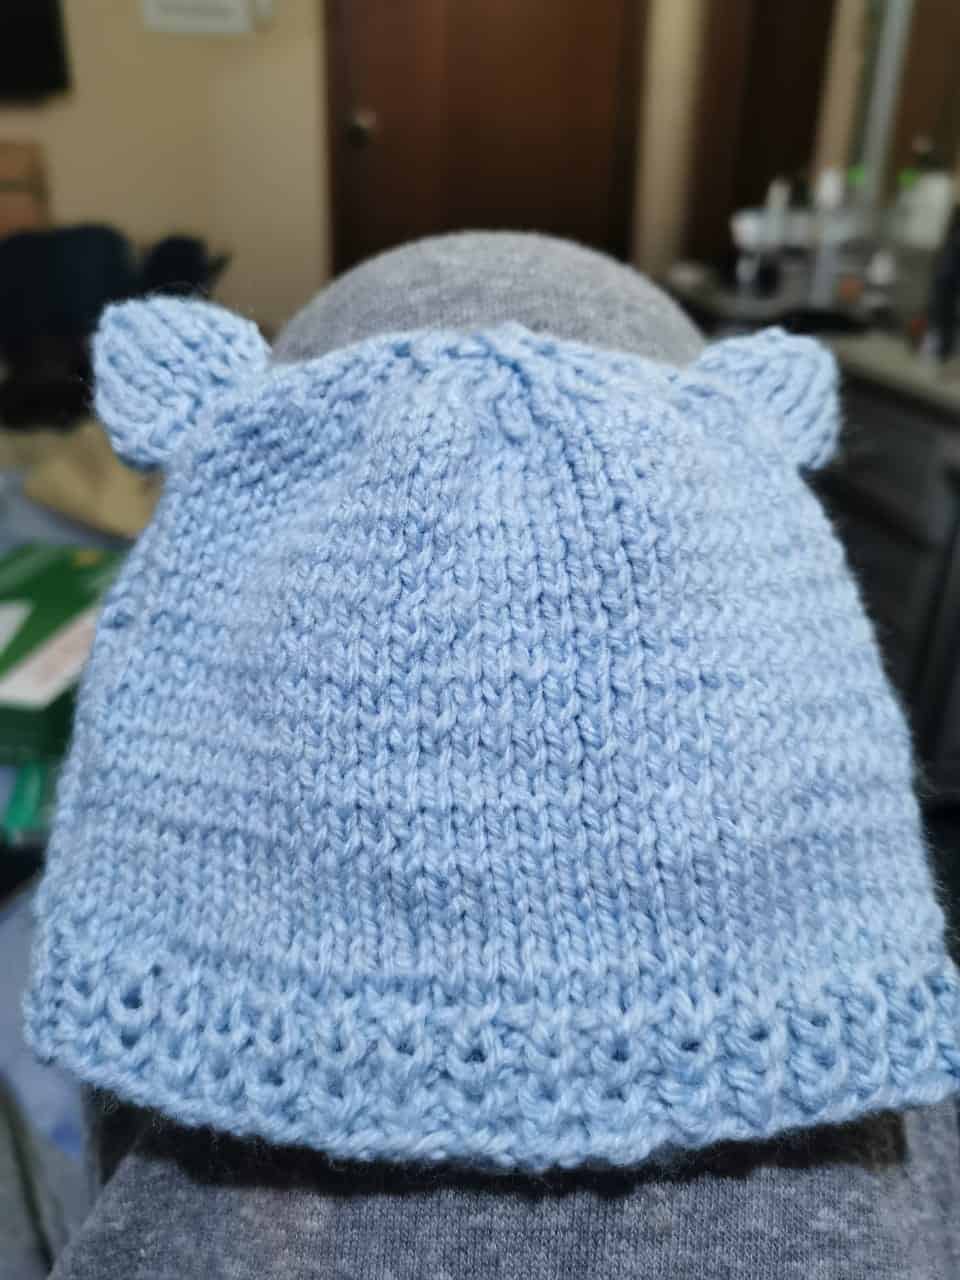 A blue hat with ears.